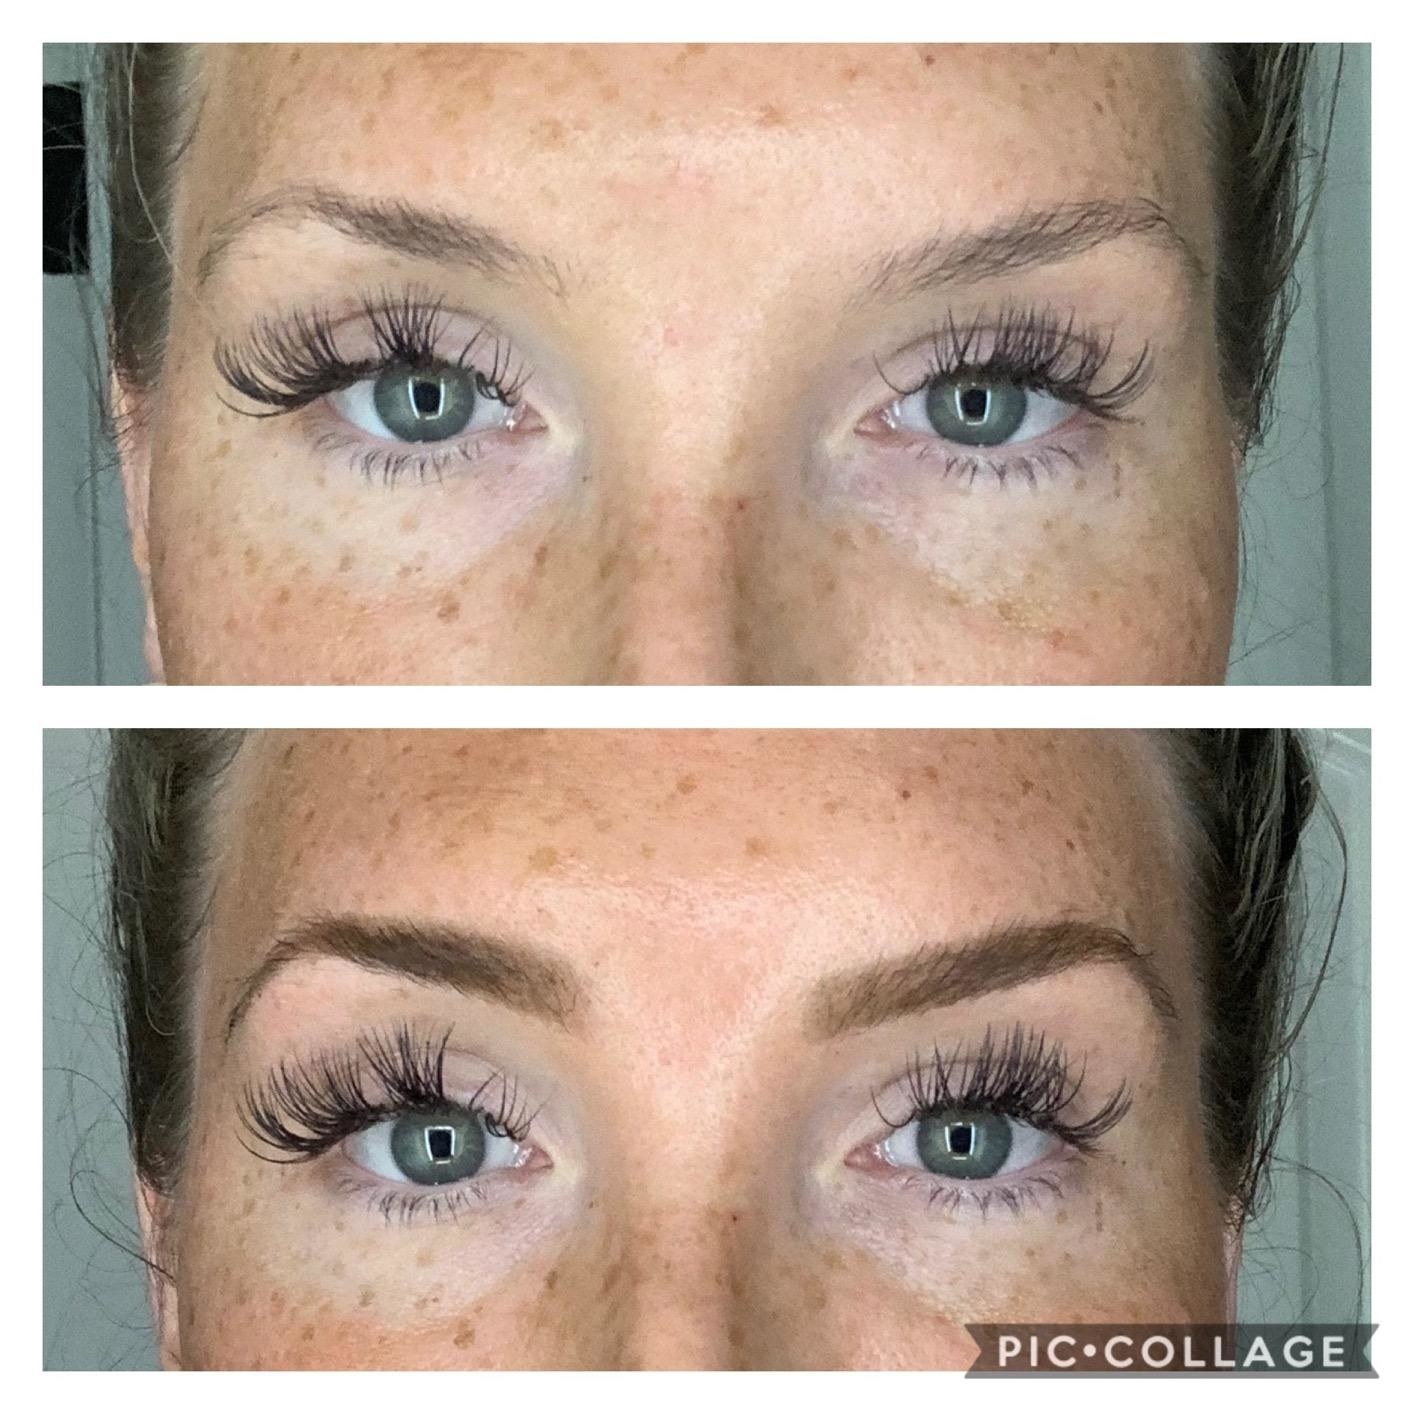 before and after reviewer images; before with very light brown eyebrows, after with medium dark brown eyebrows